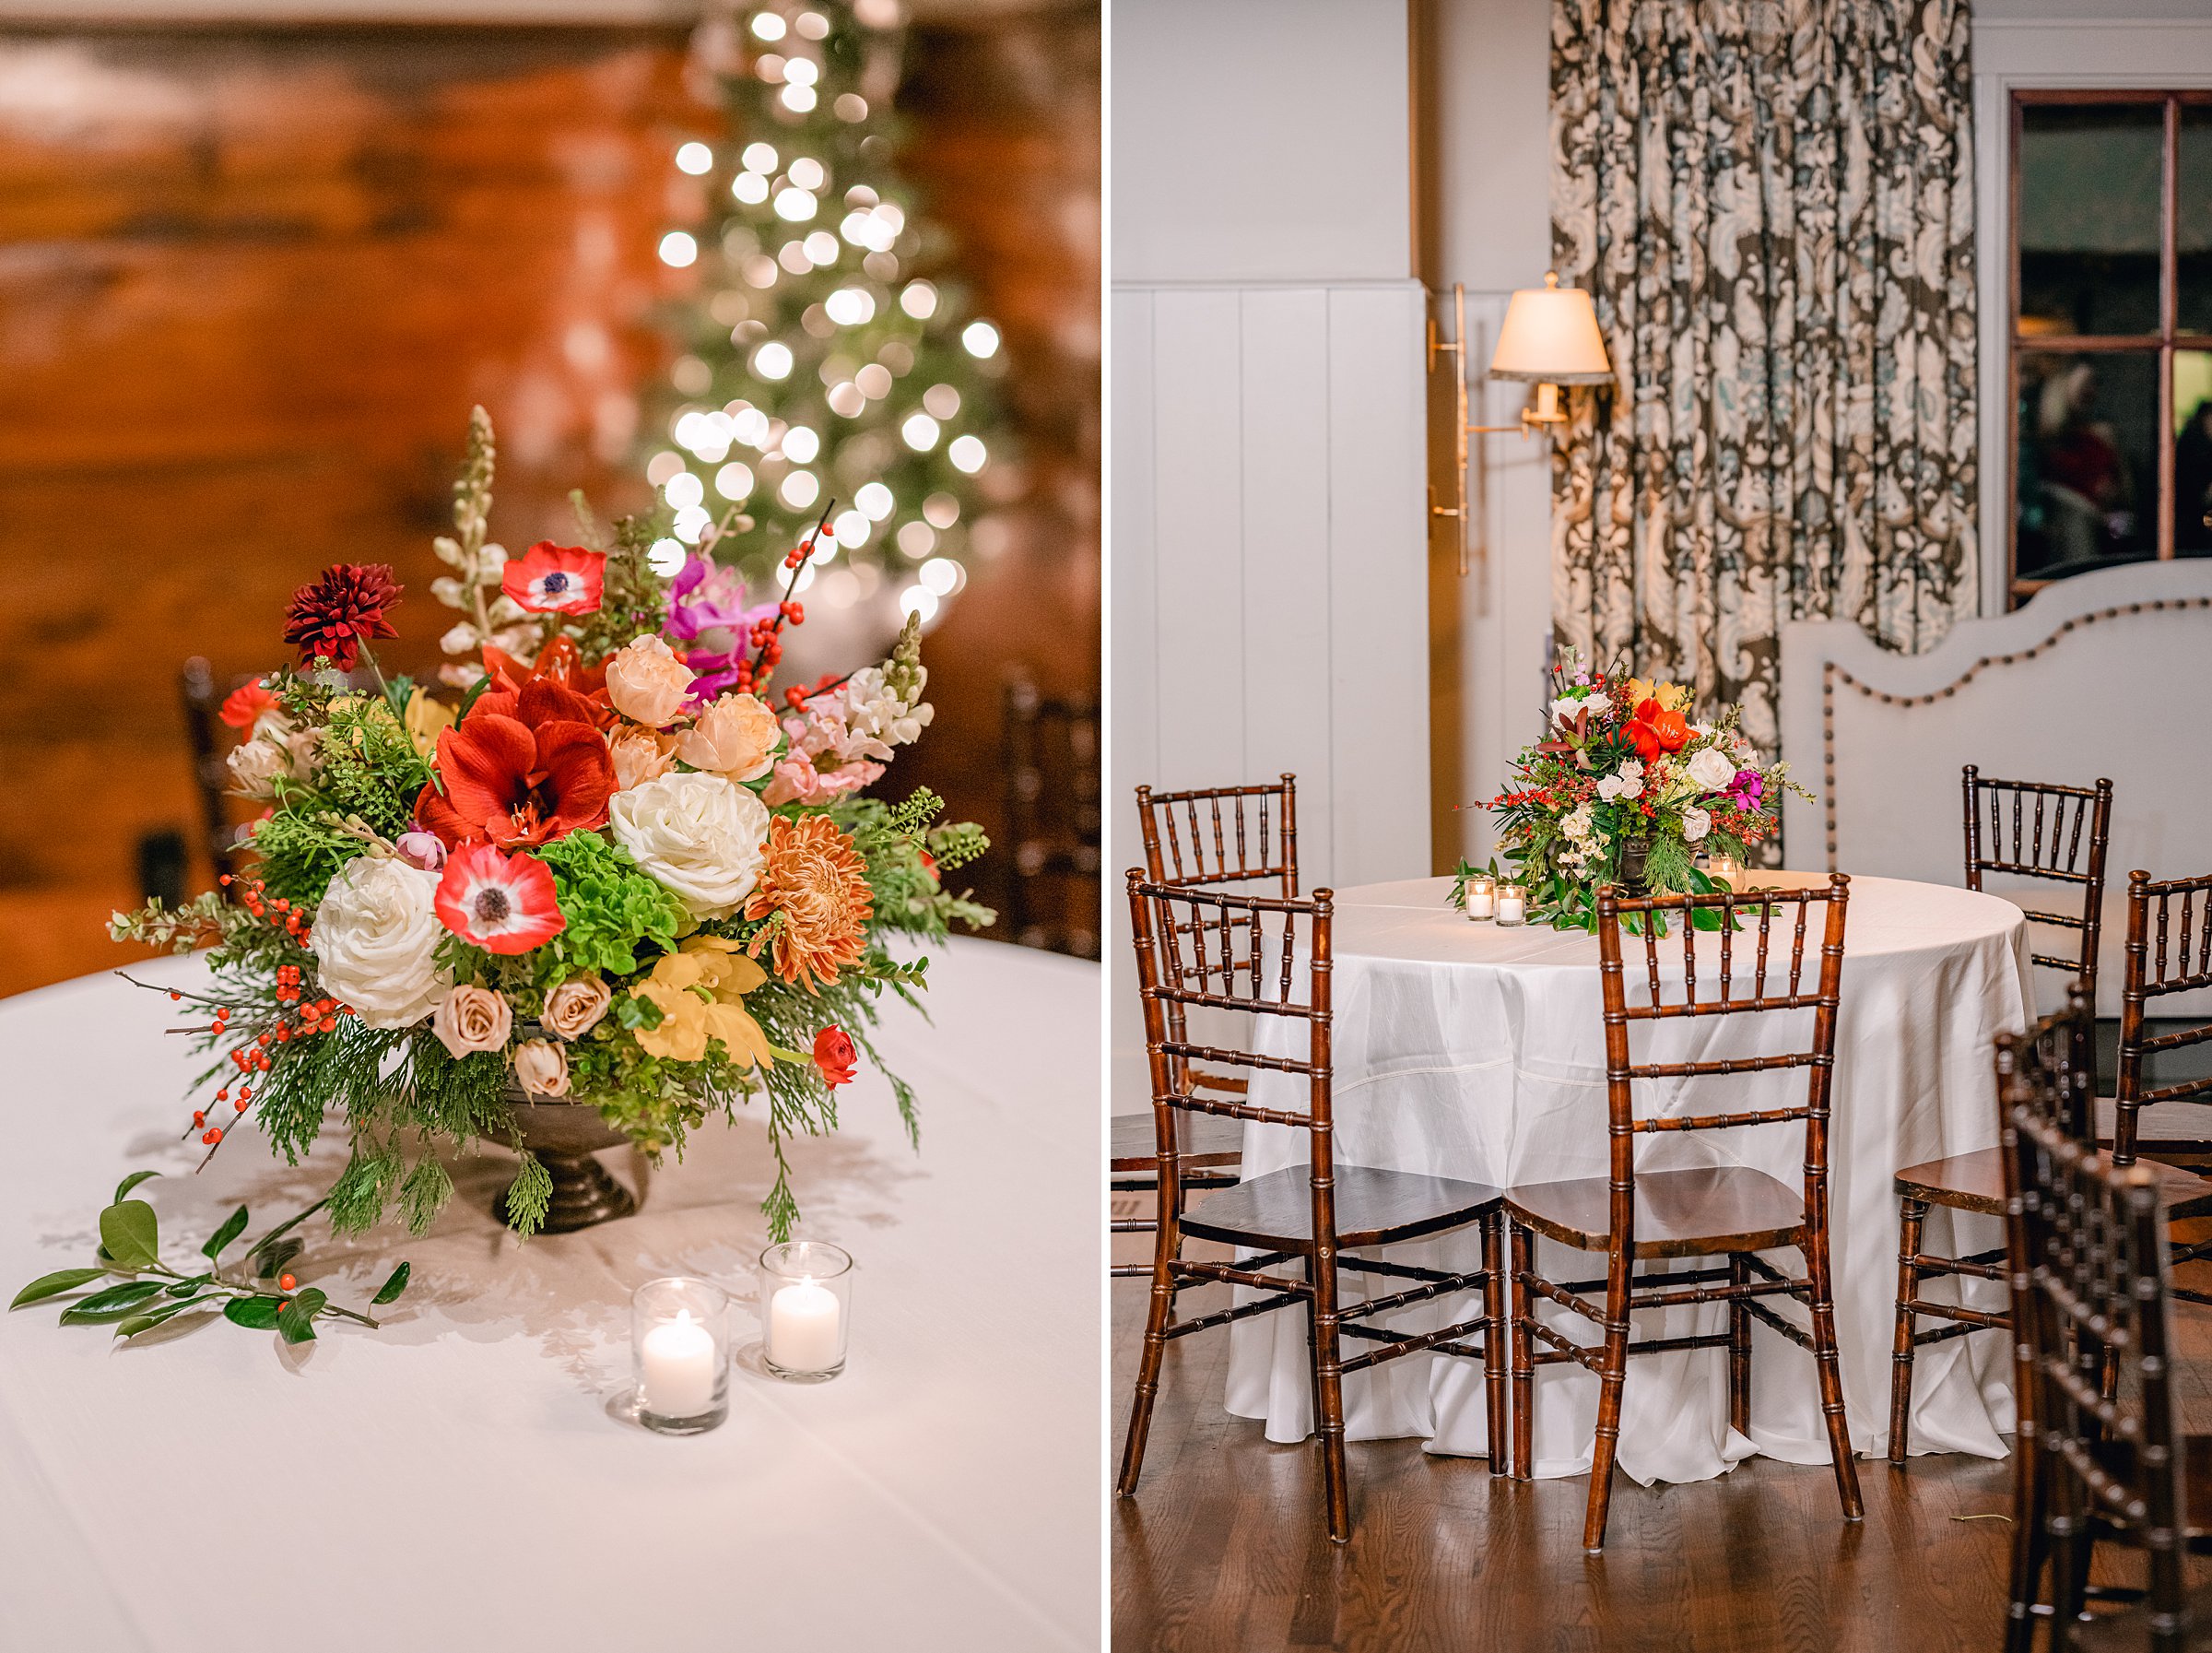 colorful winter wedding in columbus, ga - colorful floral arrangements in the big eddy club with unique florals